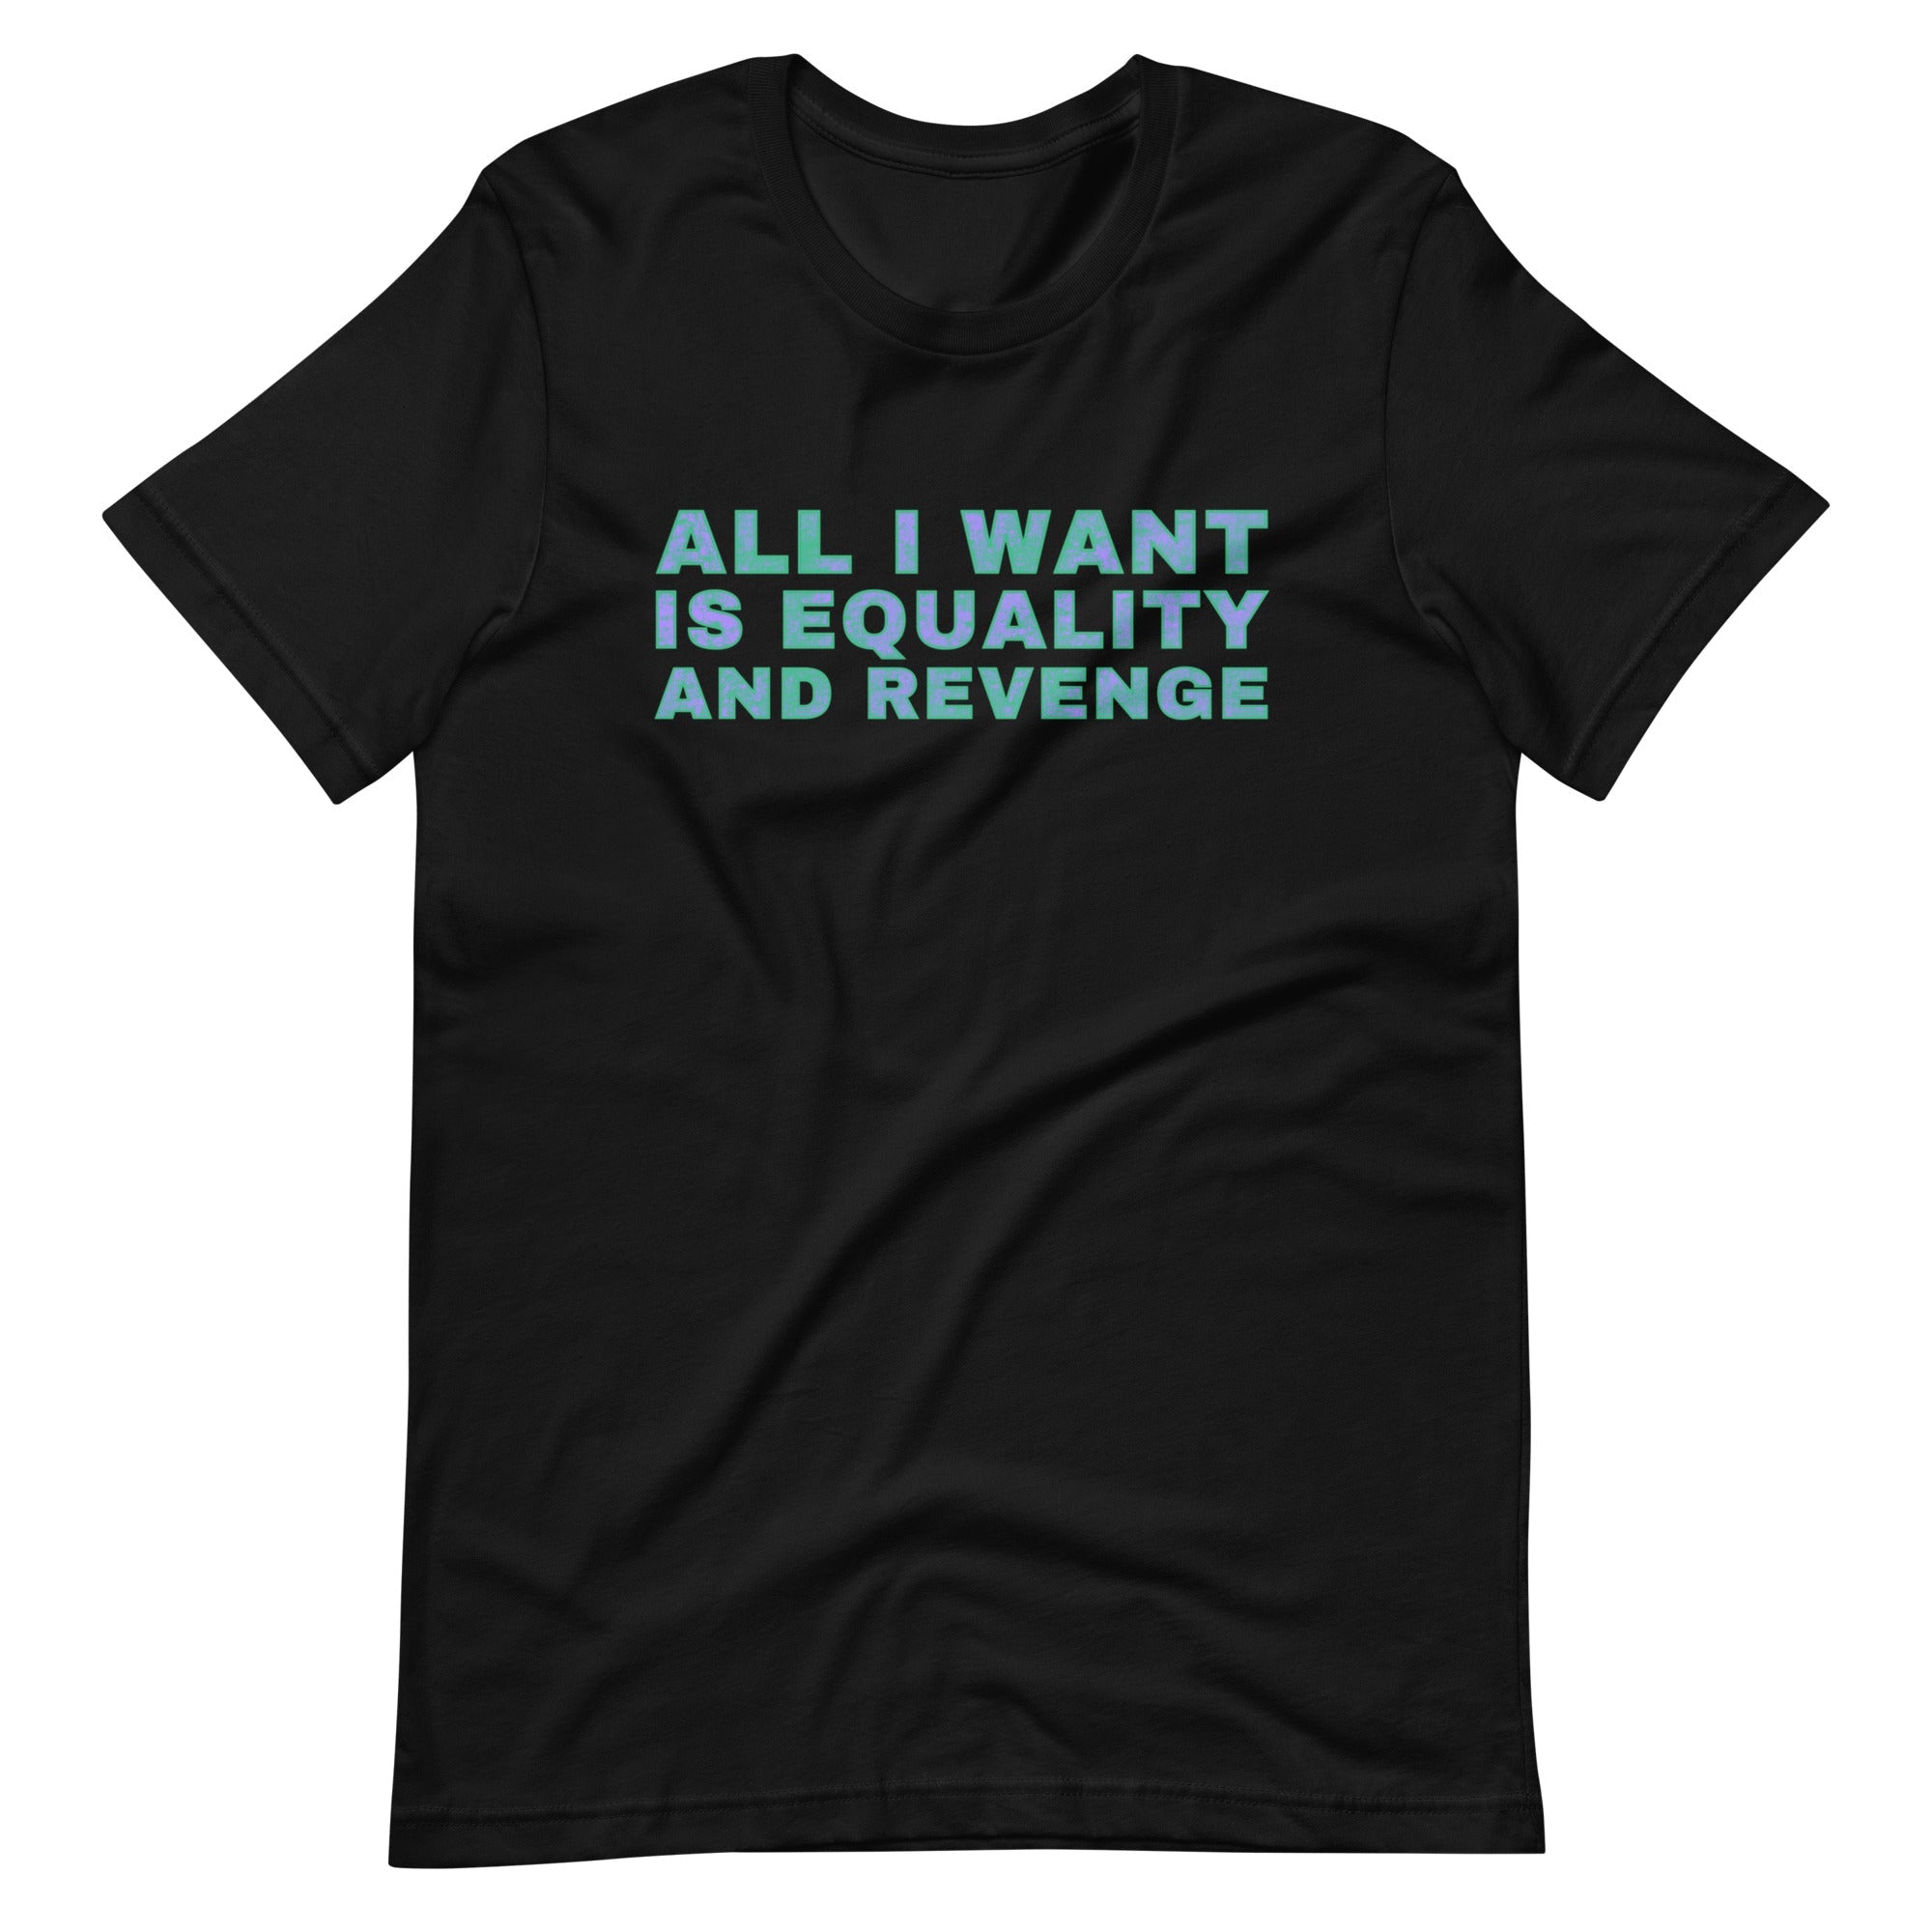 Black feminist t-shirt with the text 'All I Want is Equality and Revenge,' conveying empowerment and a strong message of justice